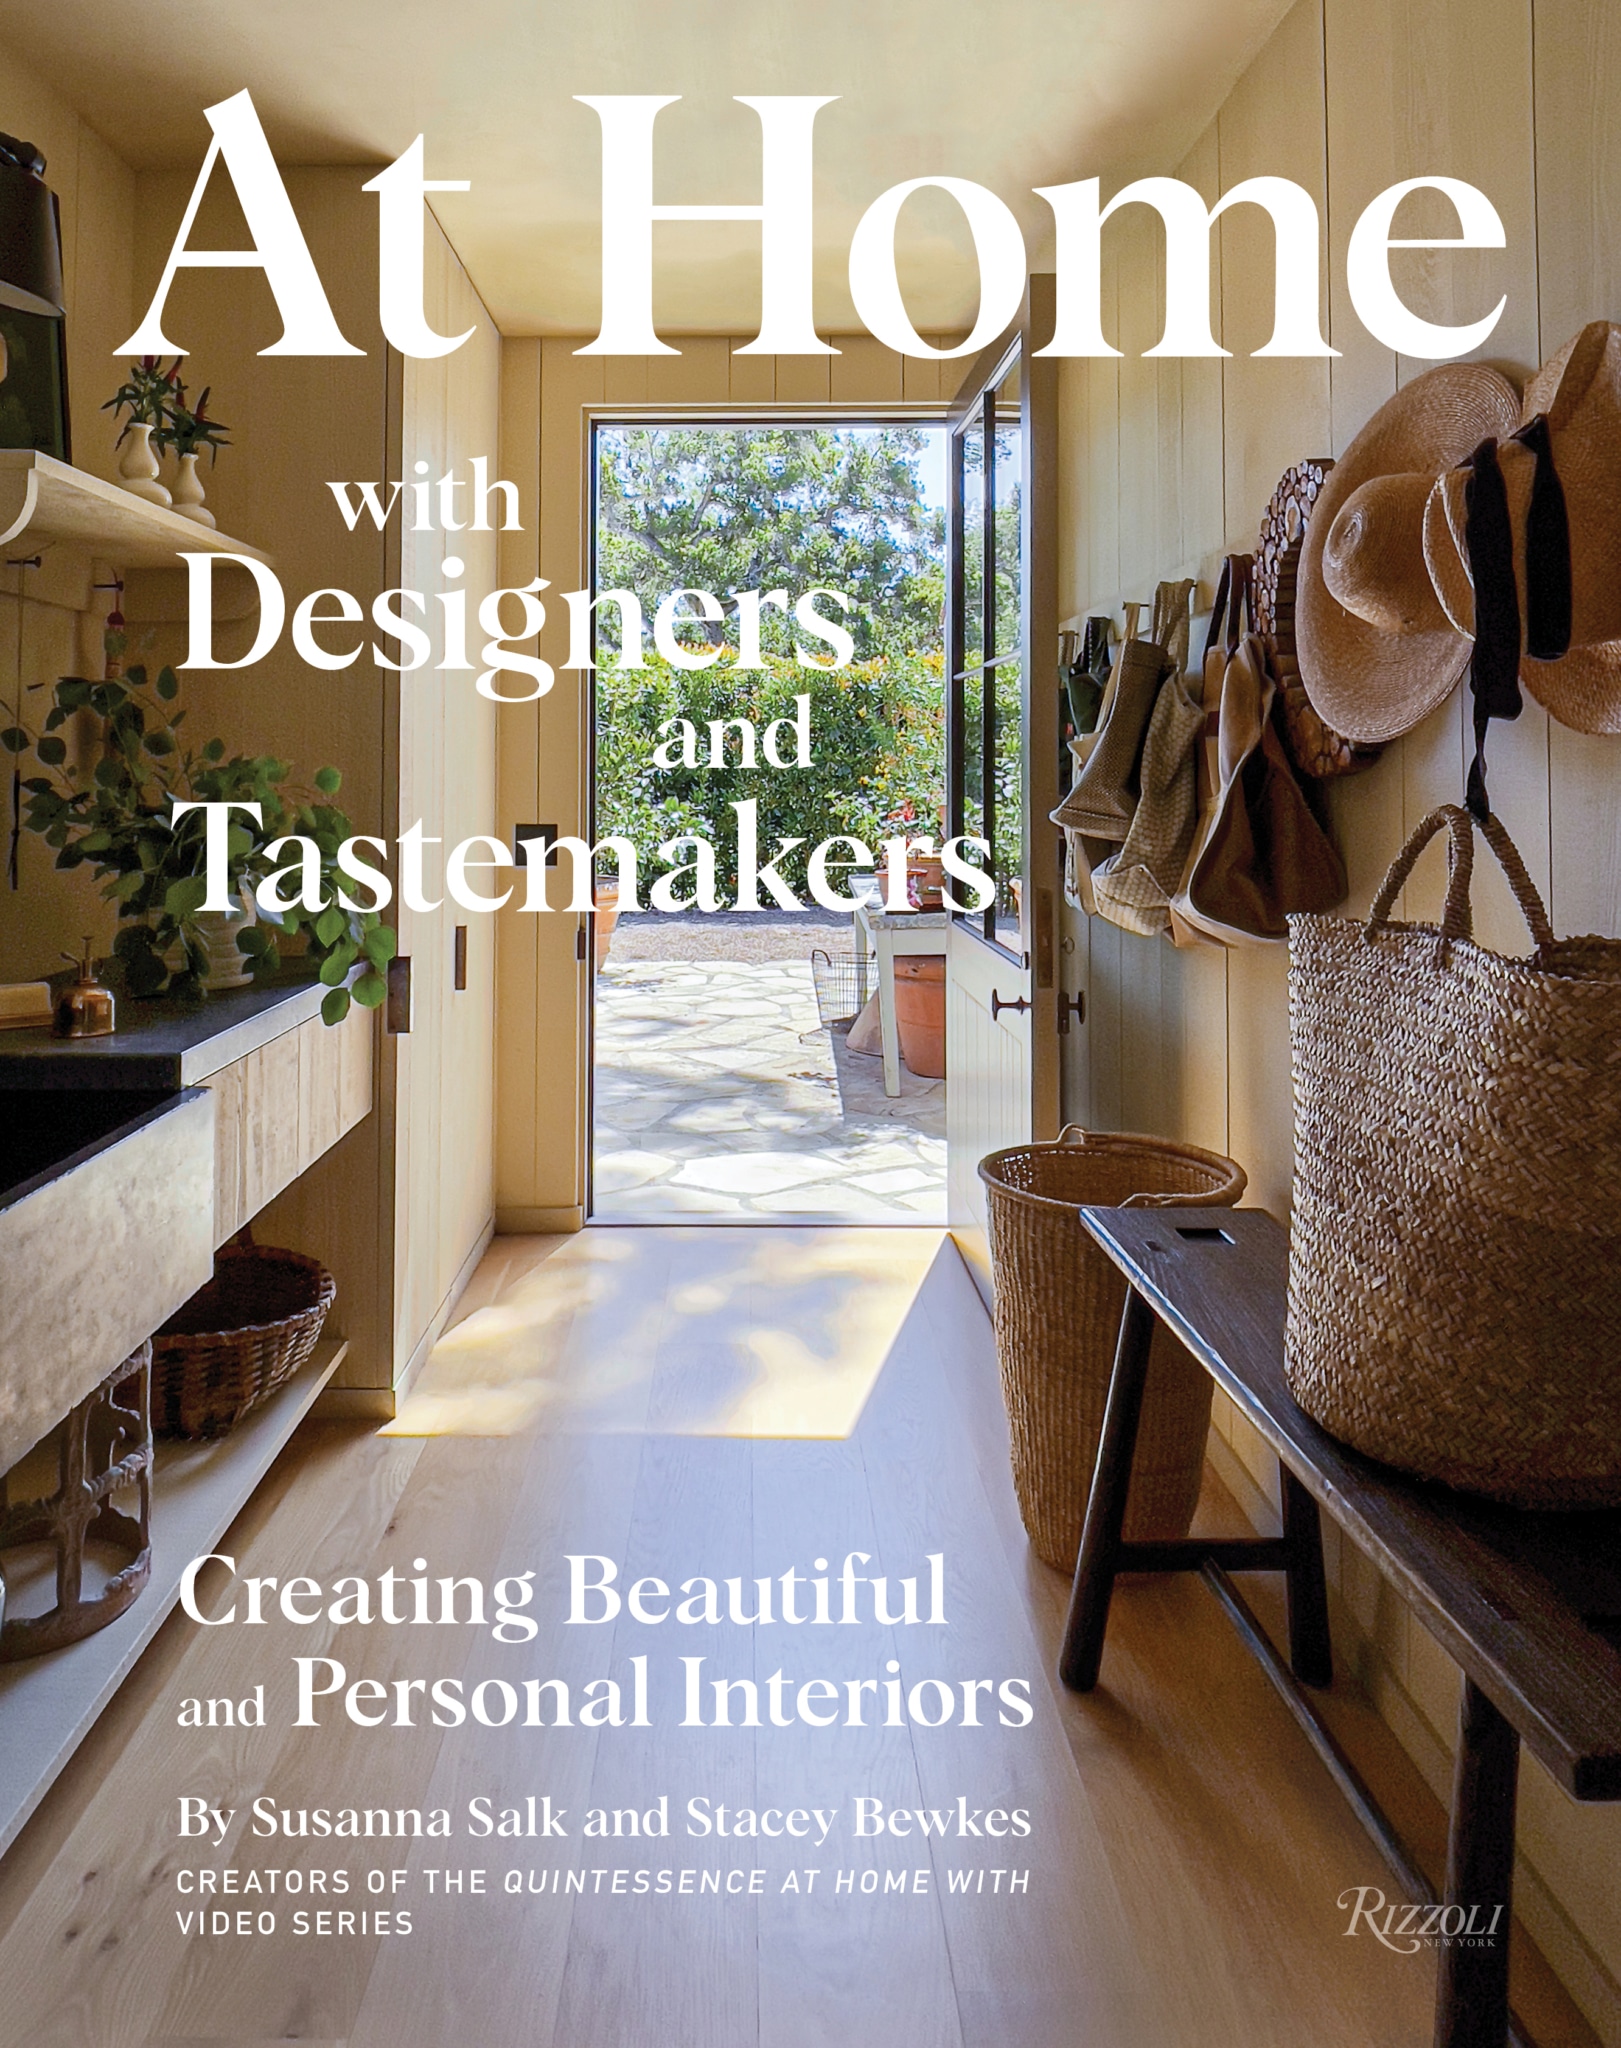 At Home with Designers and Tastemakers - Susanna Salk author and Stacey Bewkes Photography